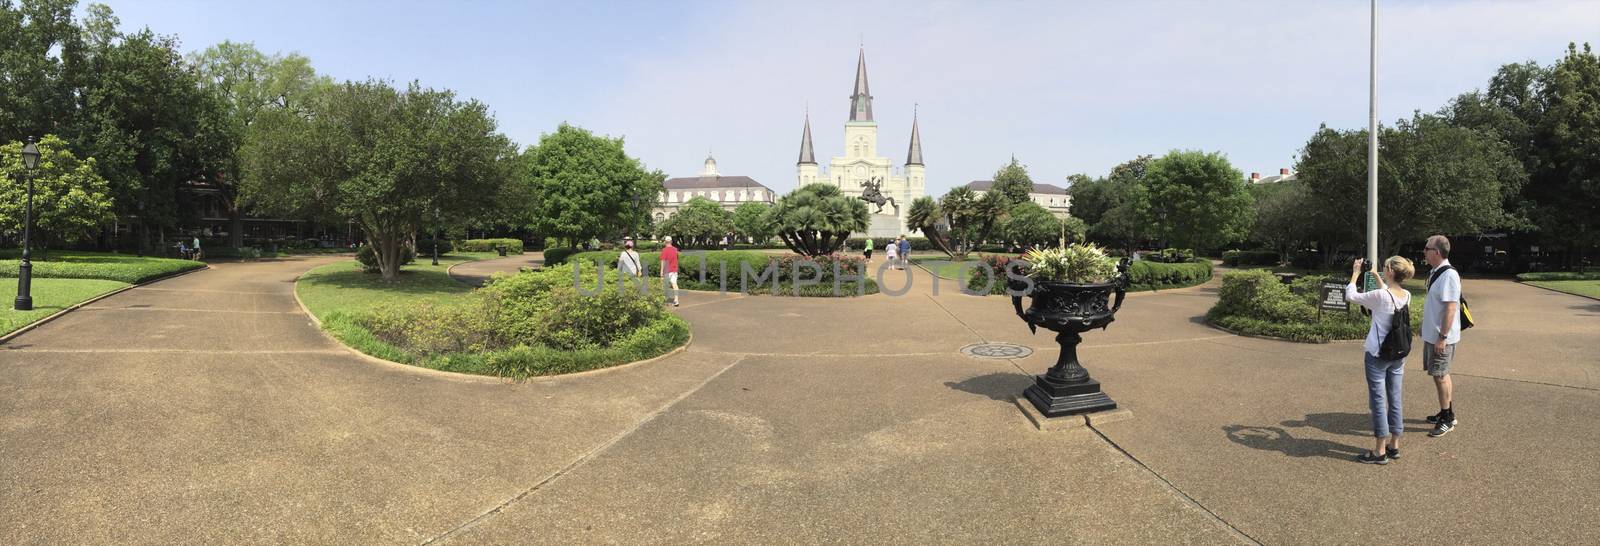 New Orleans - April 25: St. Louis Cathedral and statue of Andrew Jackson, located in Jackson Square in French Quarter of New Orleans, Louisiana, United States of America. Photo taken on: April 25th, 2015.